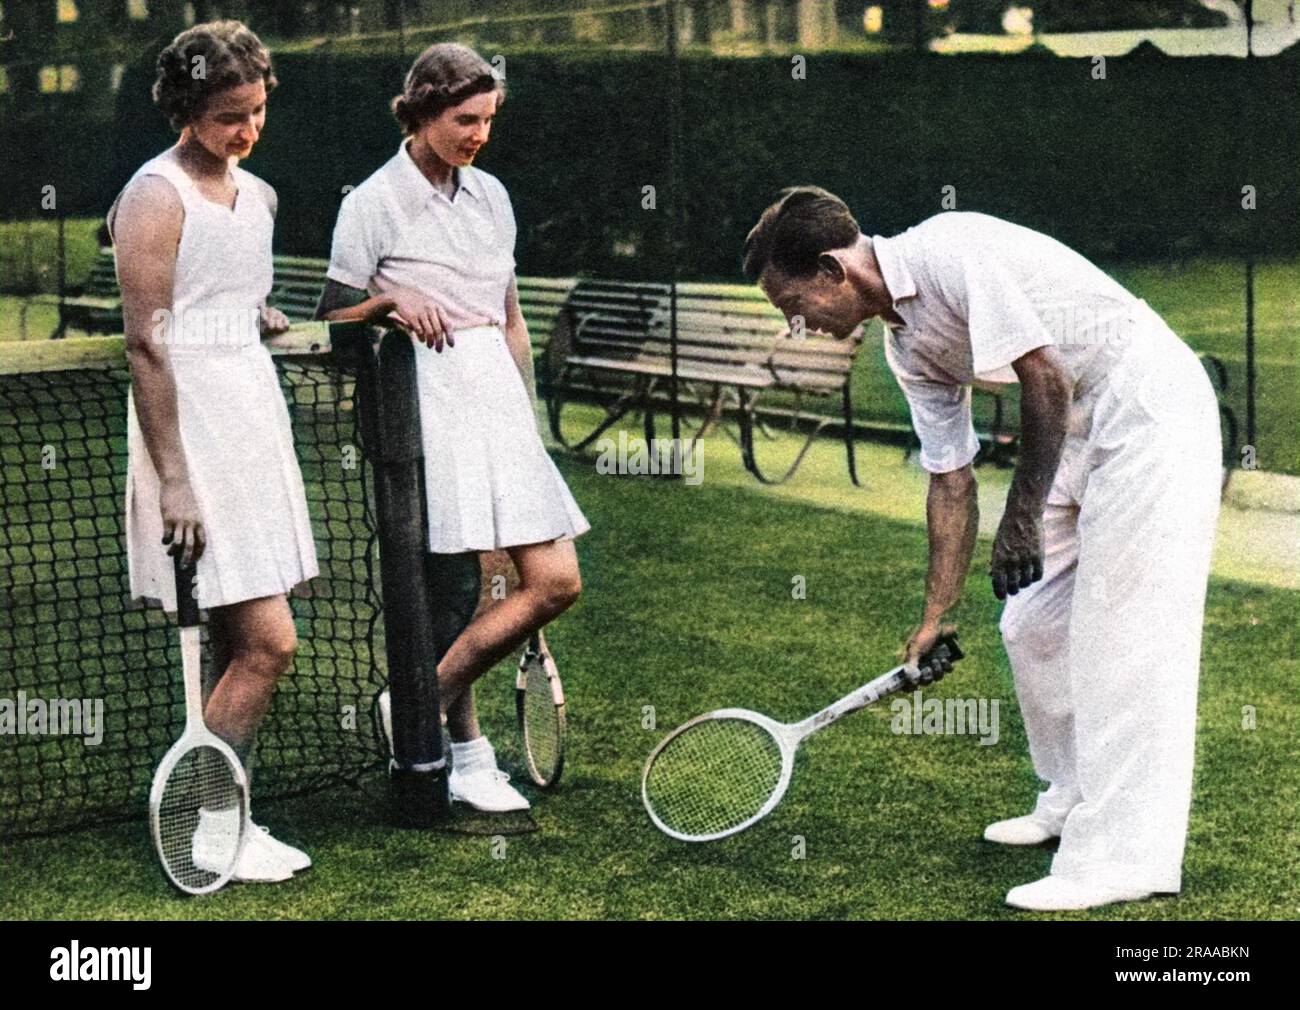 Dan Maskell (1908 - 1992), British tennis player, coach and later universally loved Wimbledon commentator.  Pictured showing Miss Mary Hardwick and Miss Kay Stammers the correct method of delivering a half-volley.     Date: 1937 Stock Photo